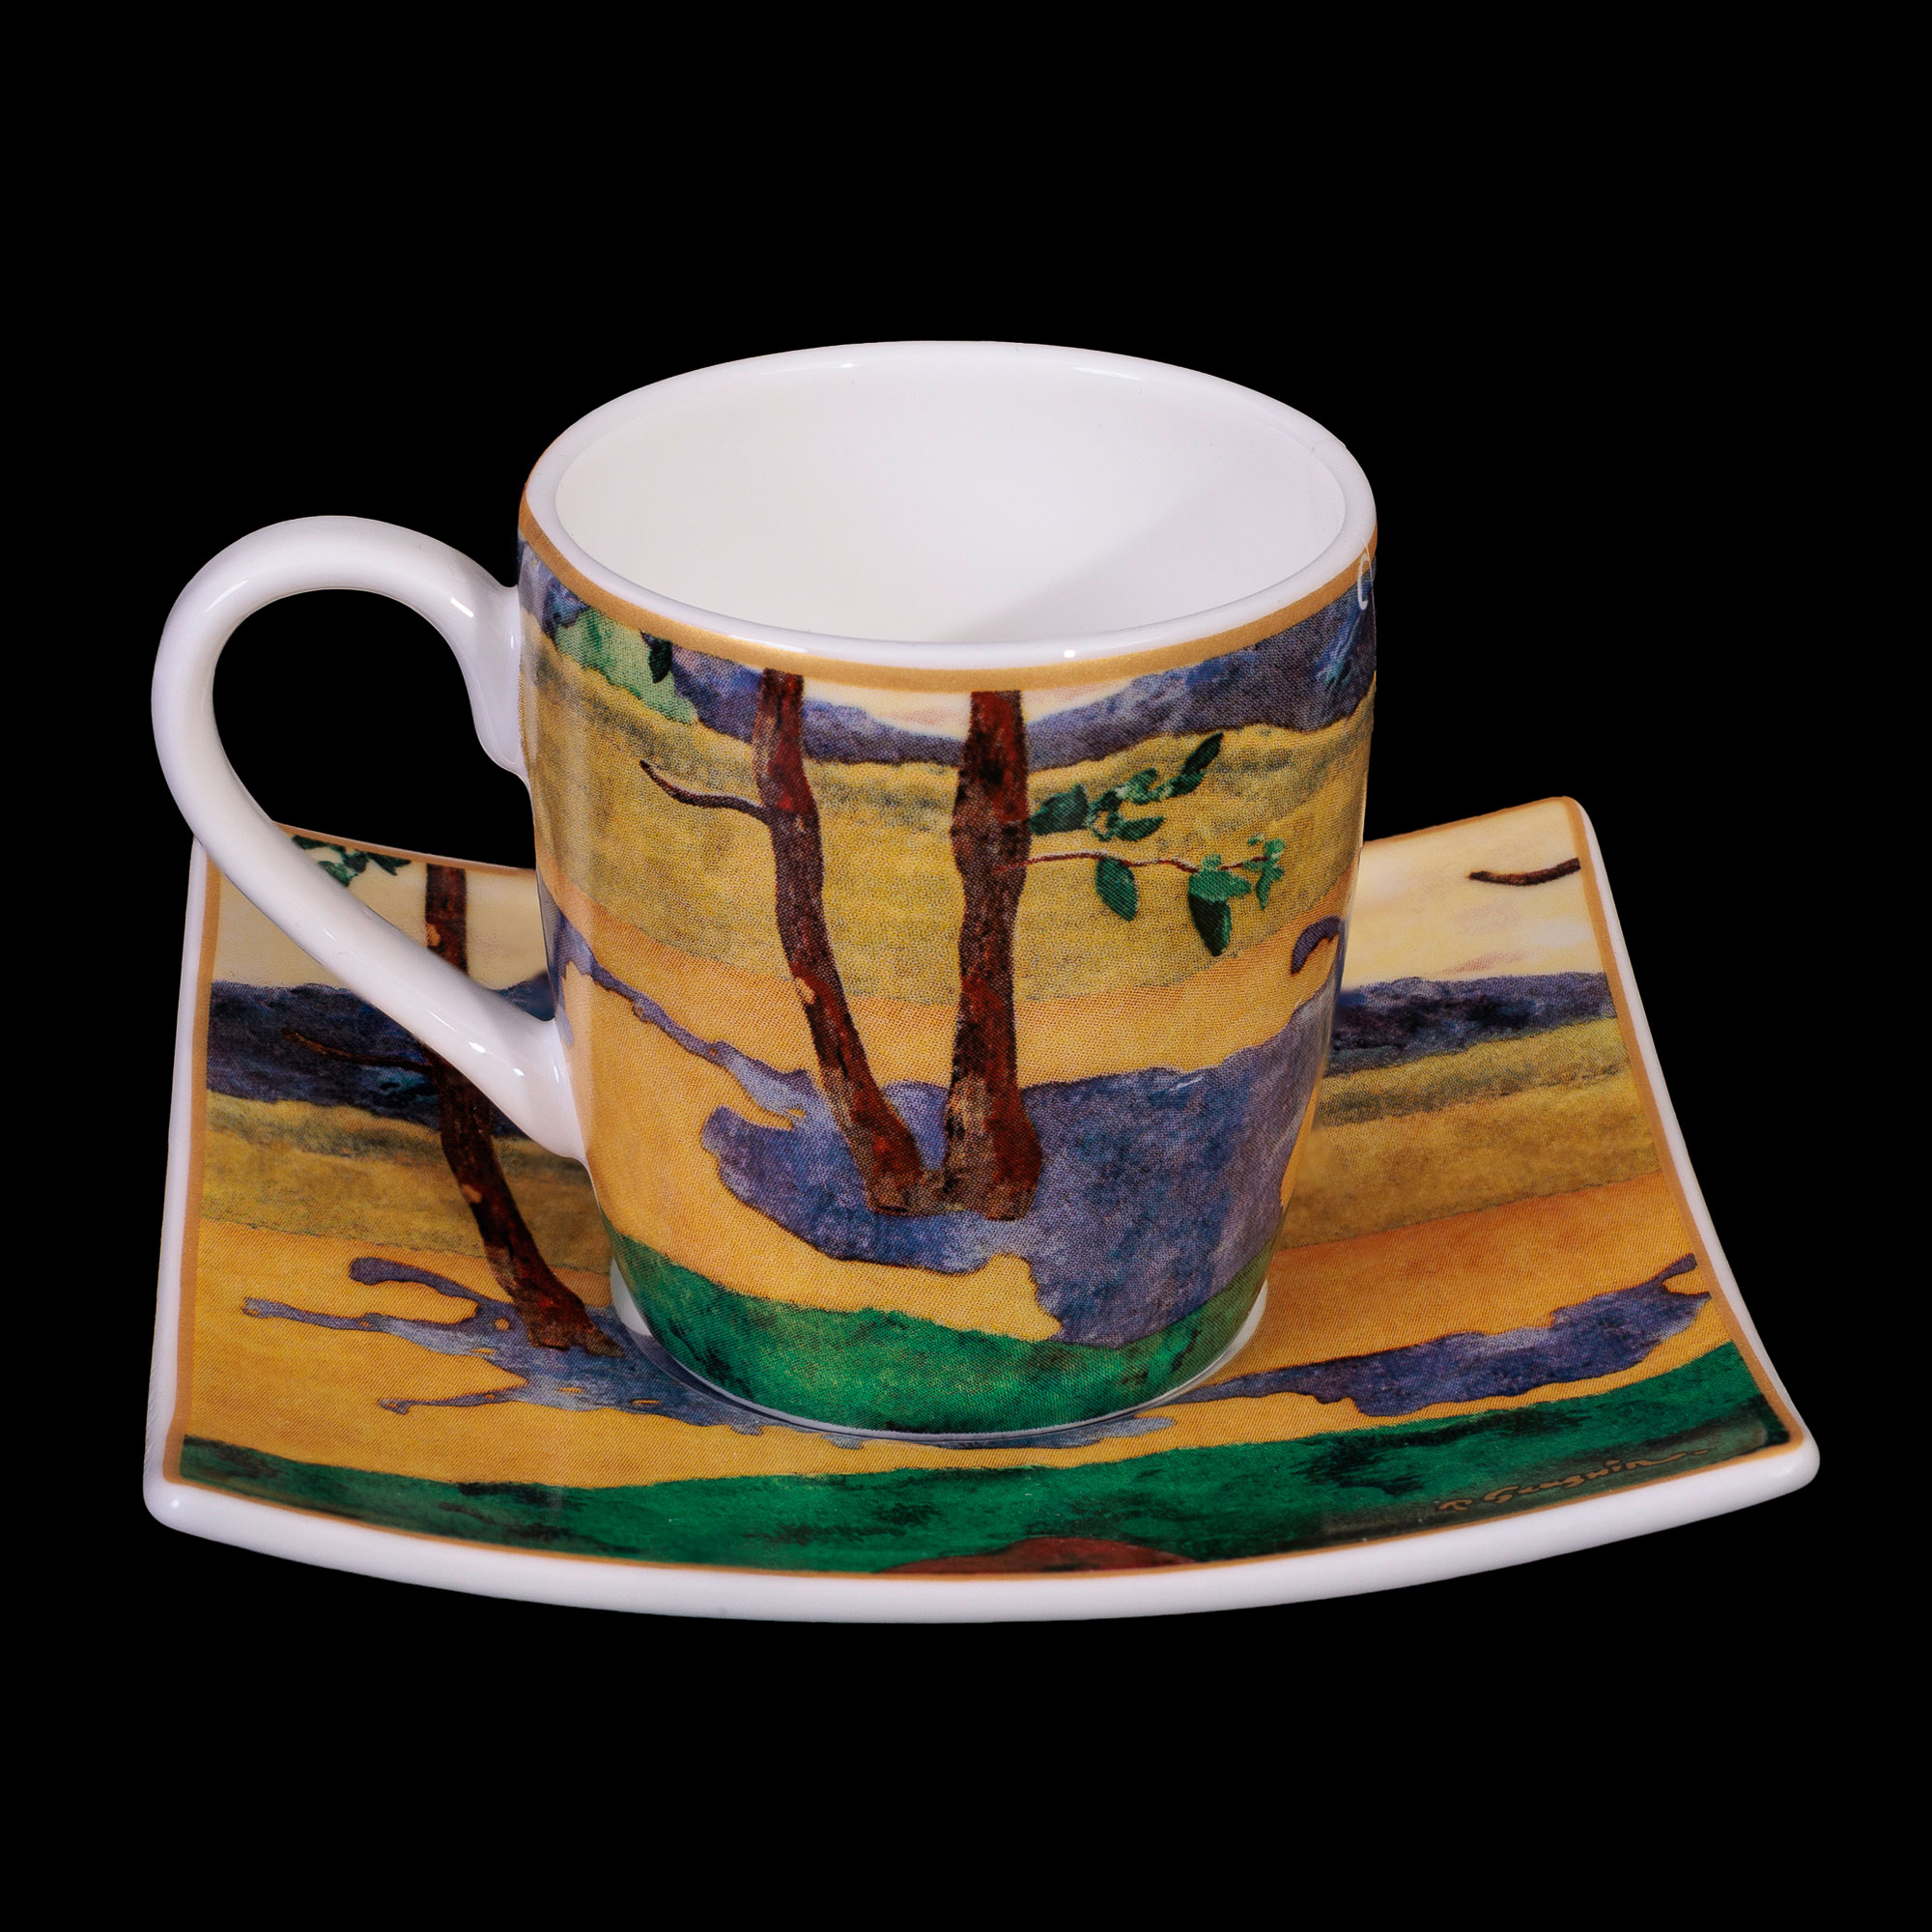 Paul Gauguin Expresso cup and saucer : café expresso : When are